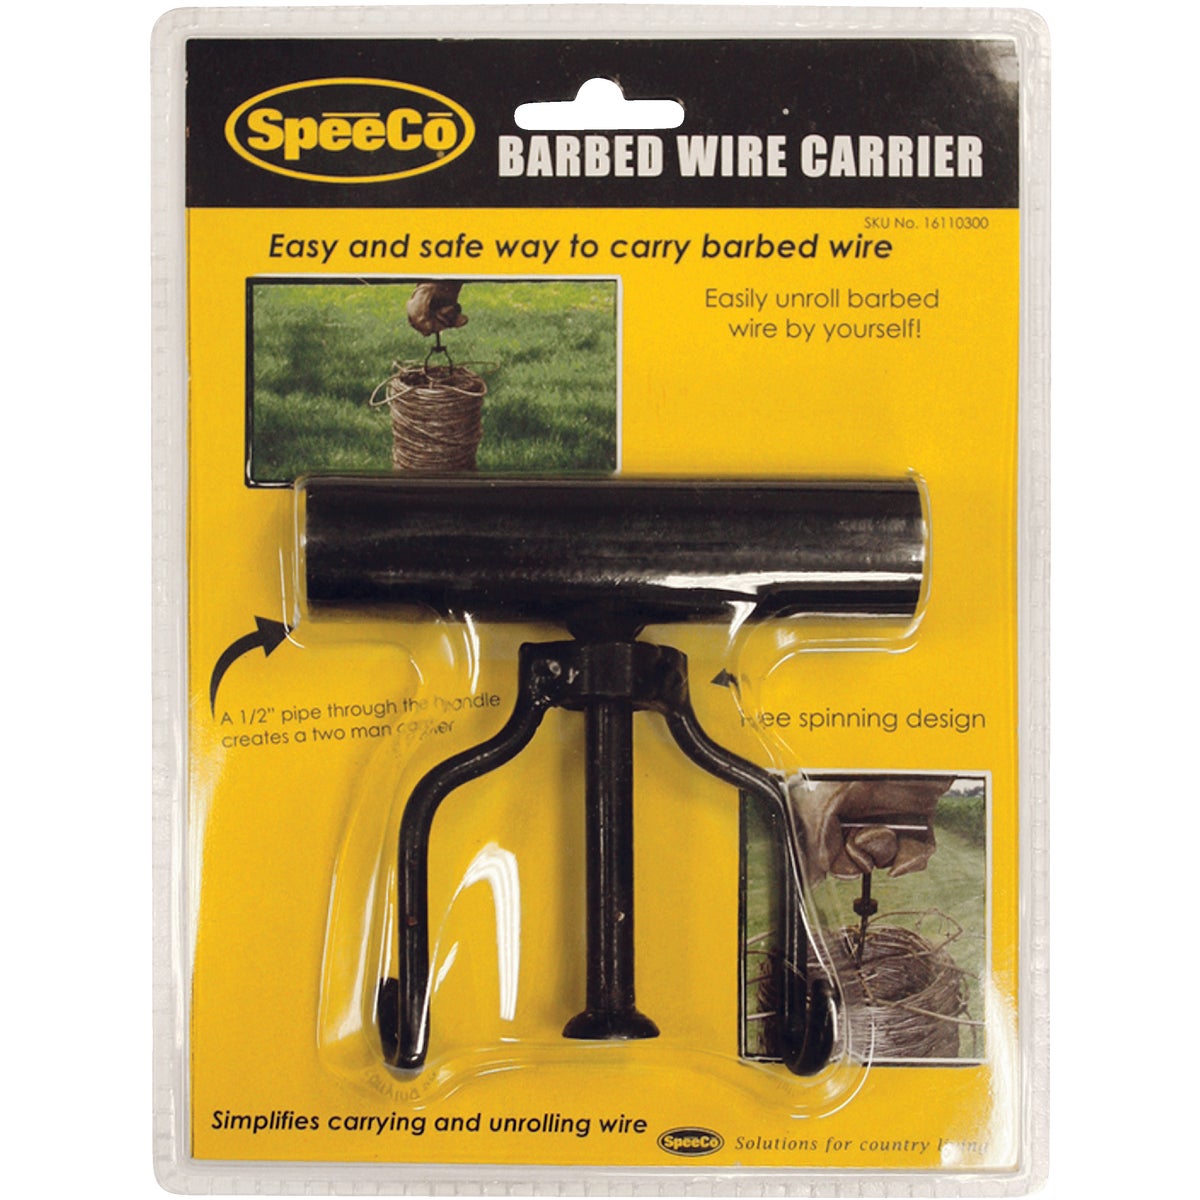 Speeco Steel Barbed Wire Carrier